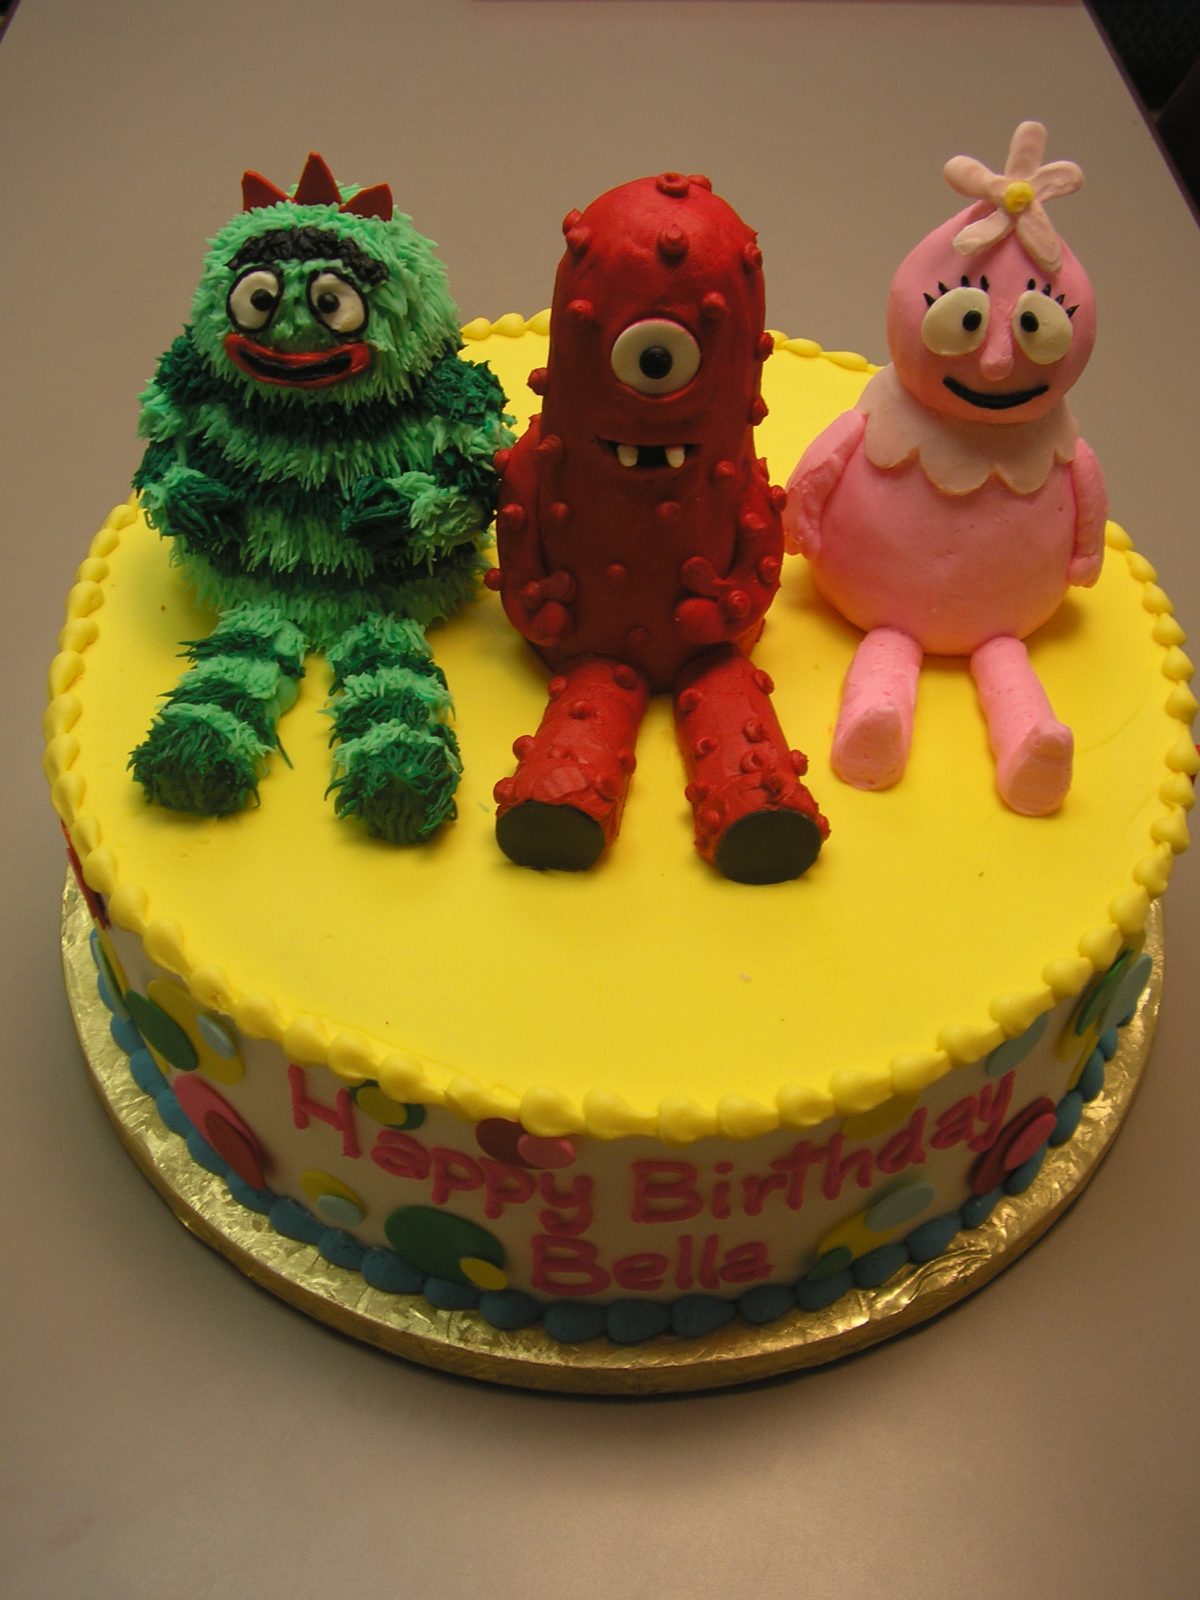 3D characters on a cake